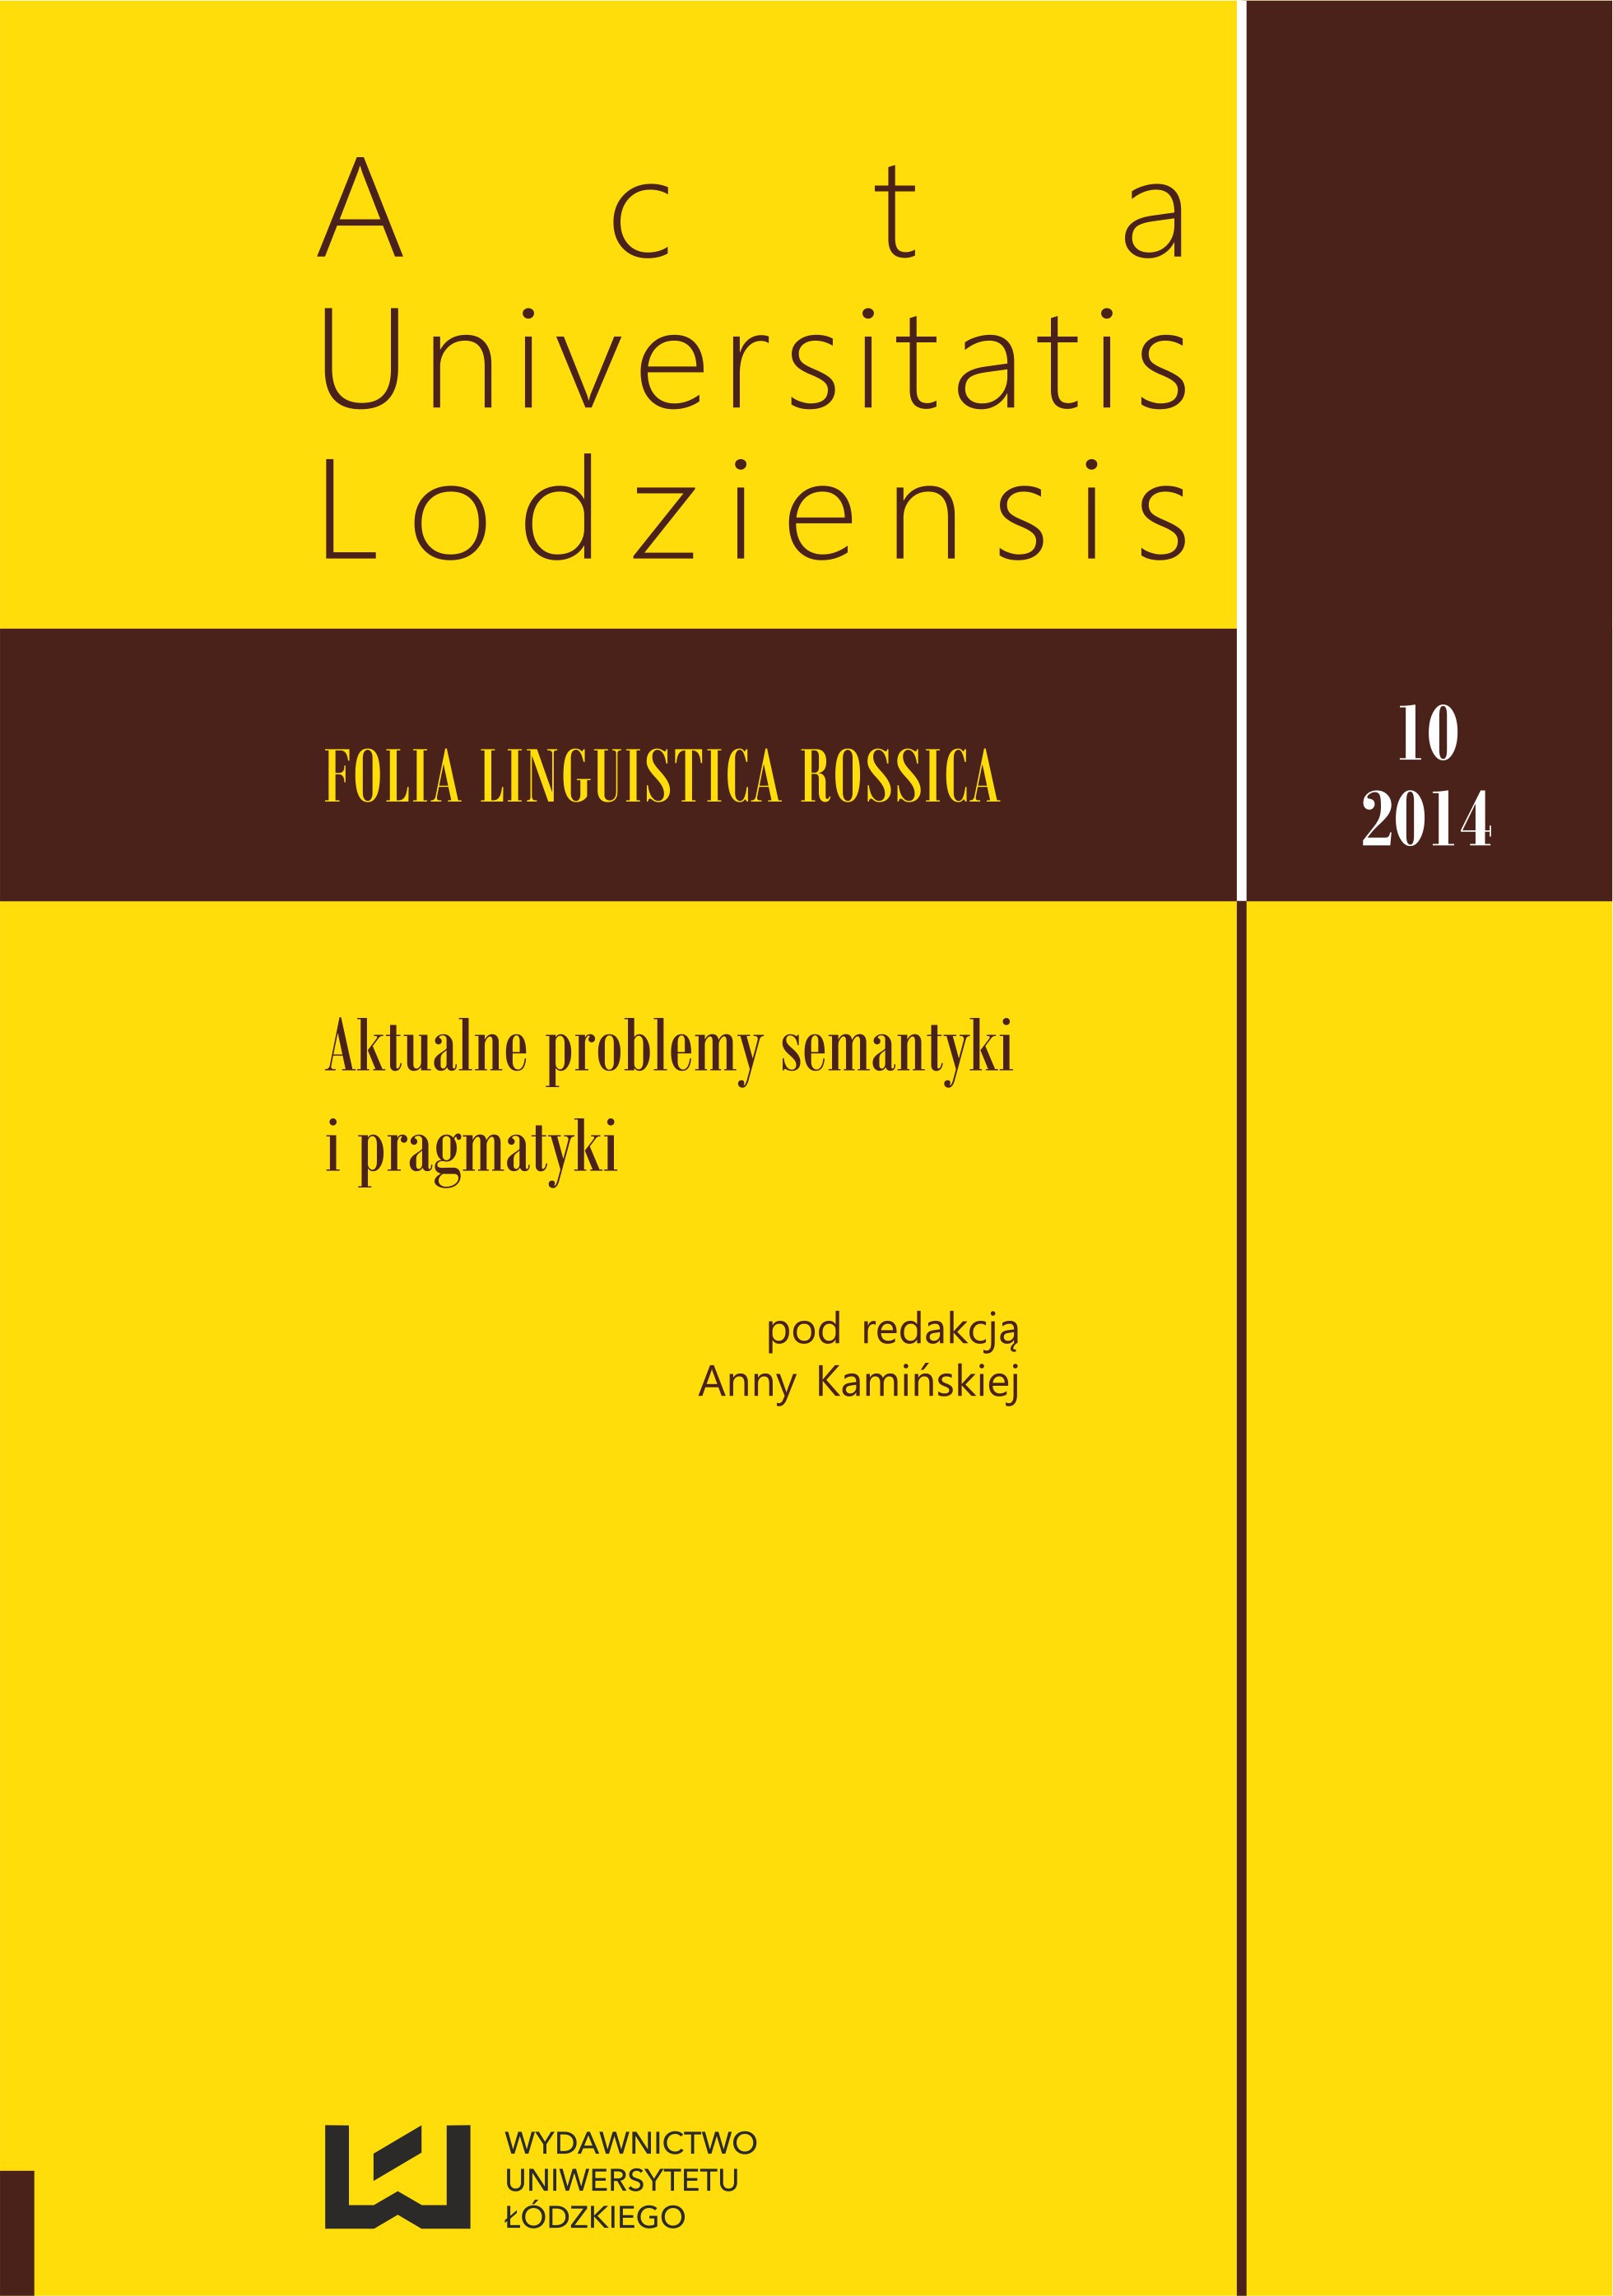 THE PATTERN OF DIVIDING AND COMPONENTS (ILLUSTRATED WITH THE EXAMPLE OF PREFIXAL VERBS IN RUSSIAN IN COMPARISON WITH POLISH) Cover Image